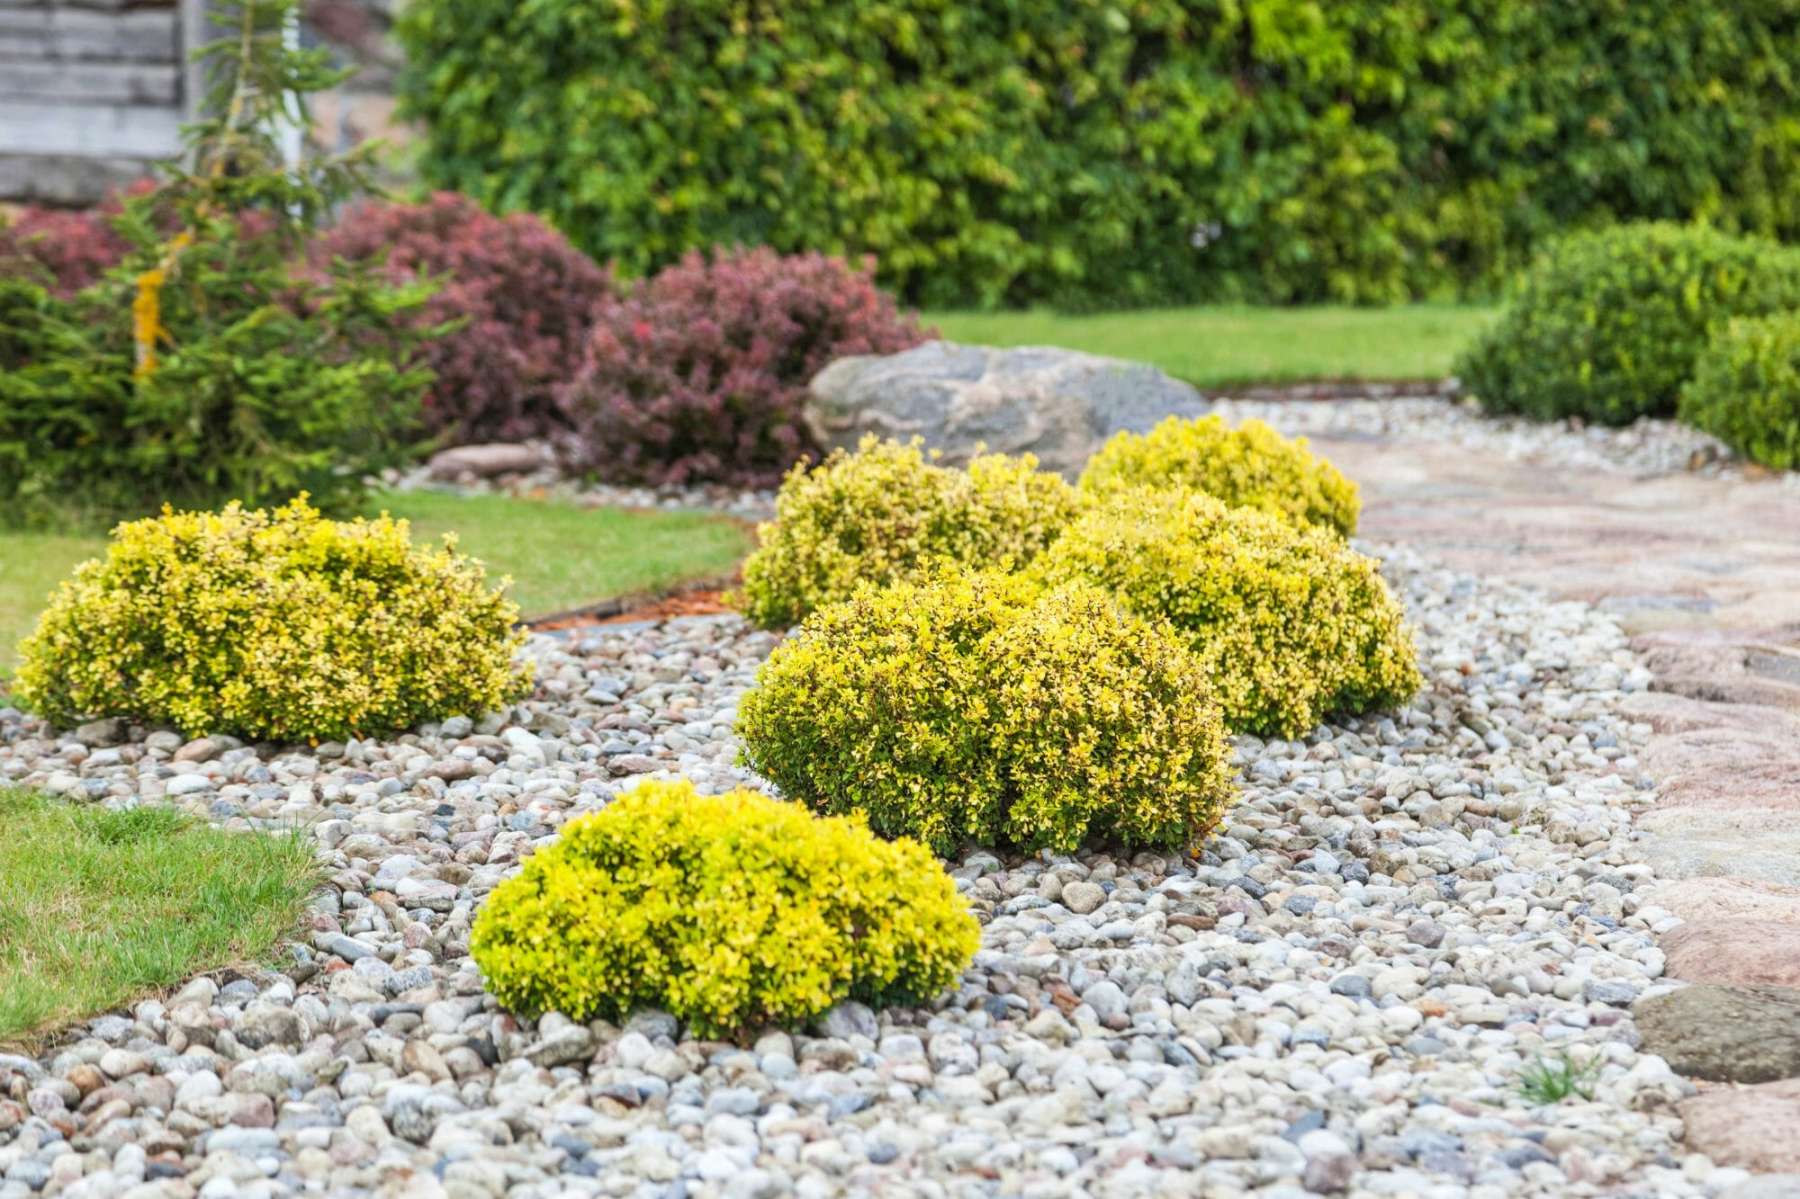 How to Design Low Maintenance Landscaping - Ohio Valley Group